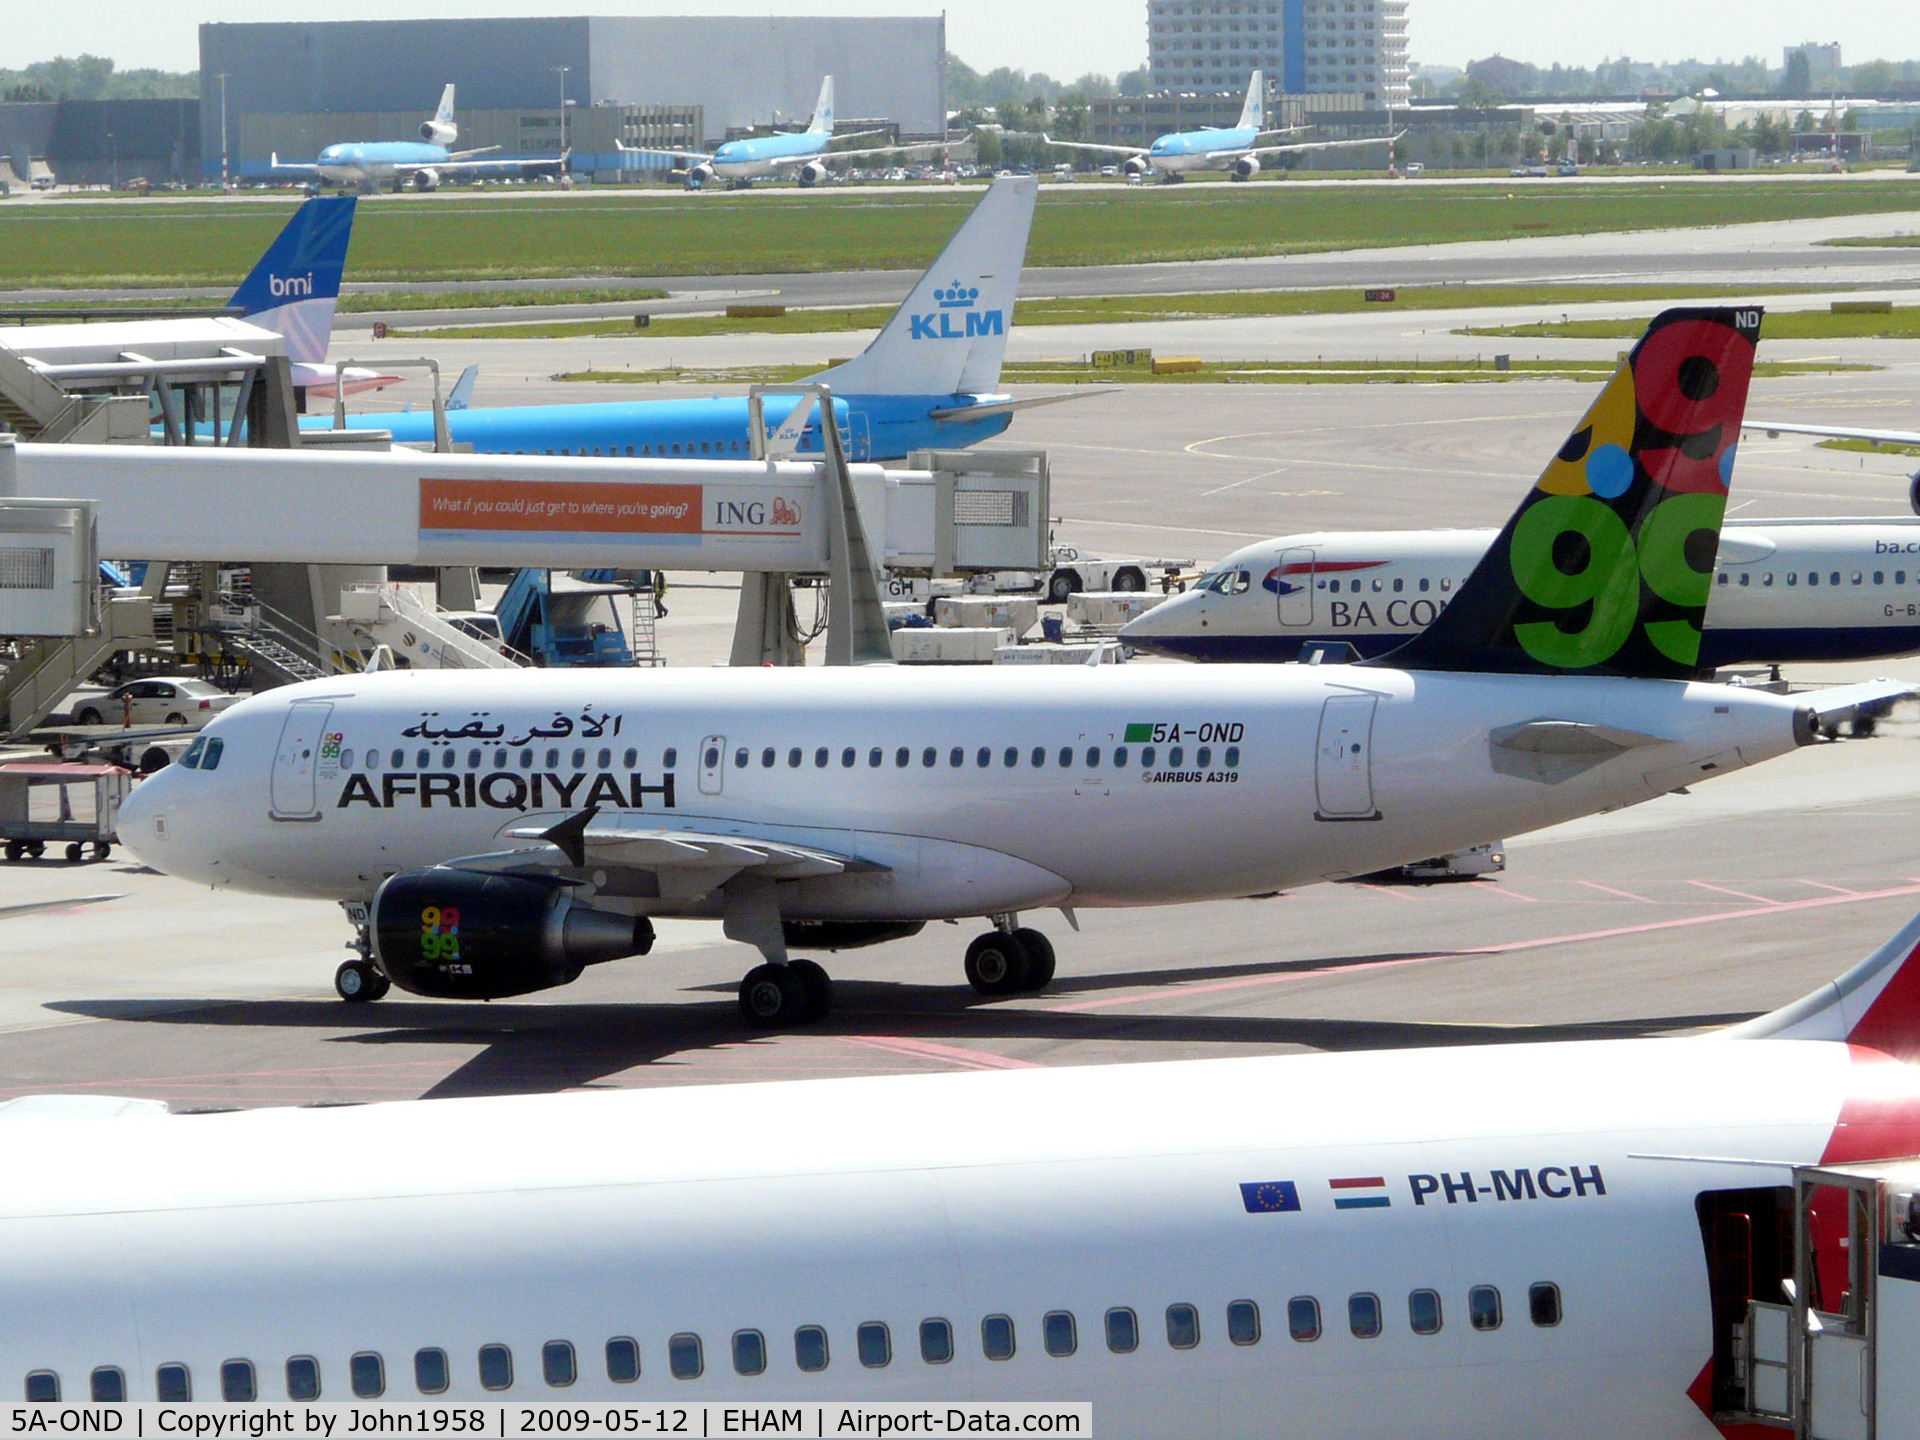 5A-OND, 2008 Airbus A319-111 C/N 3657, Afriqiyah airlines A319, about to park on stand